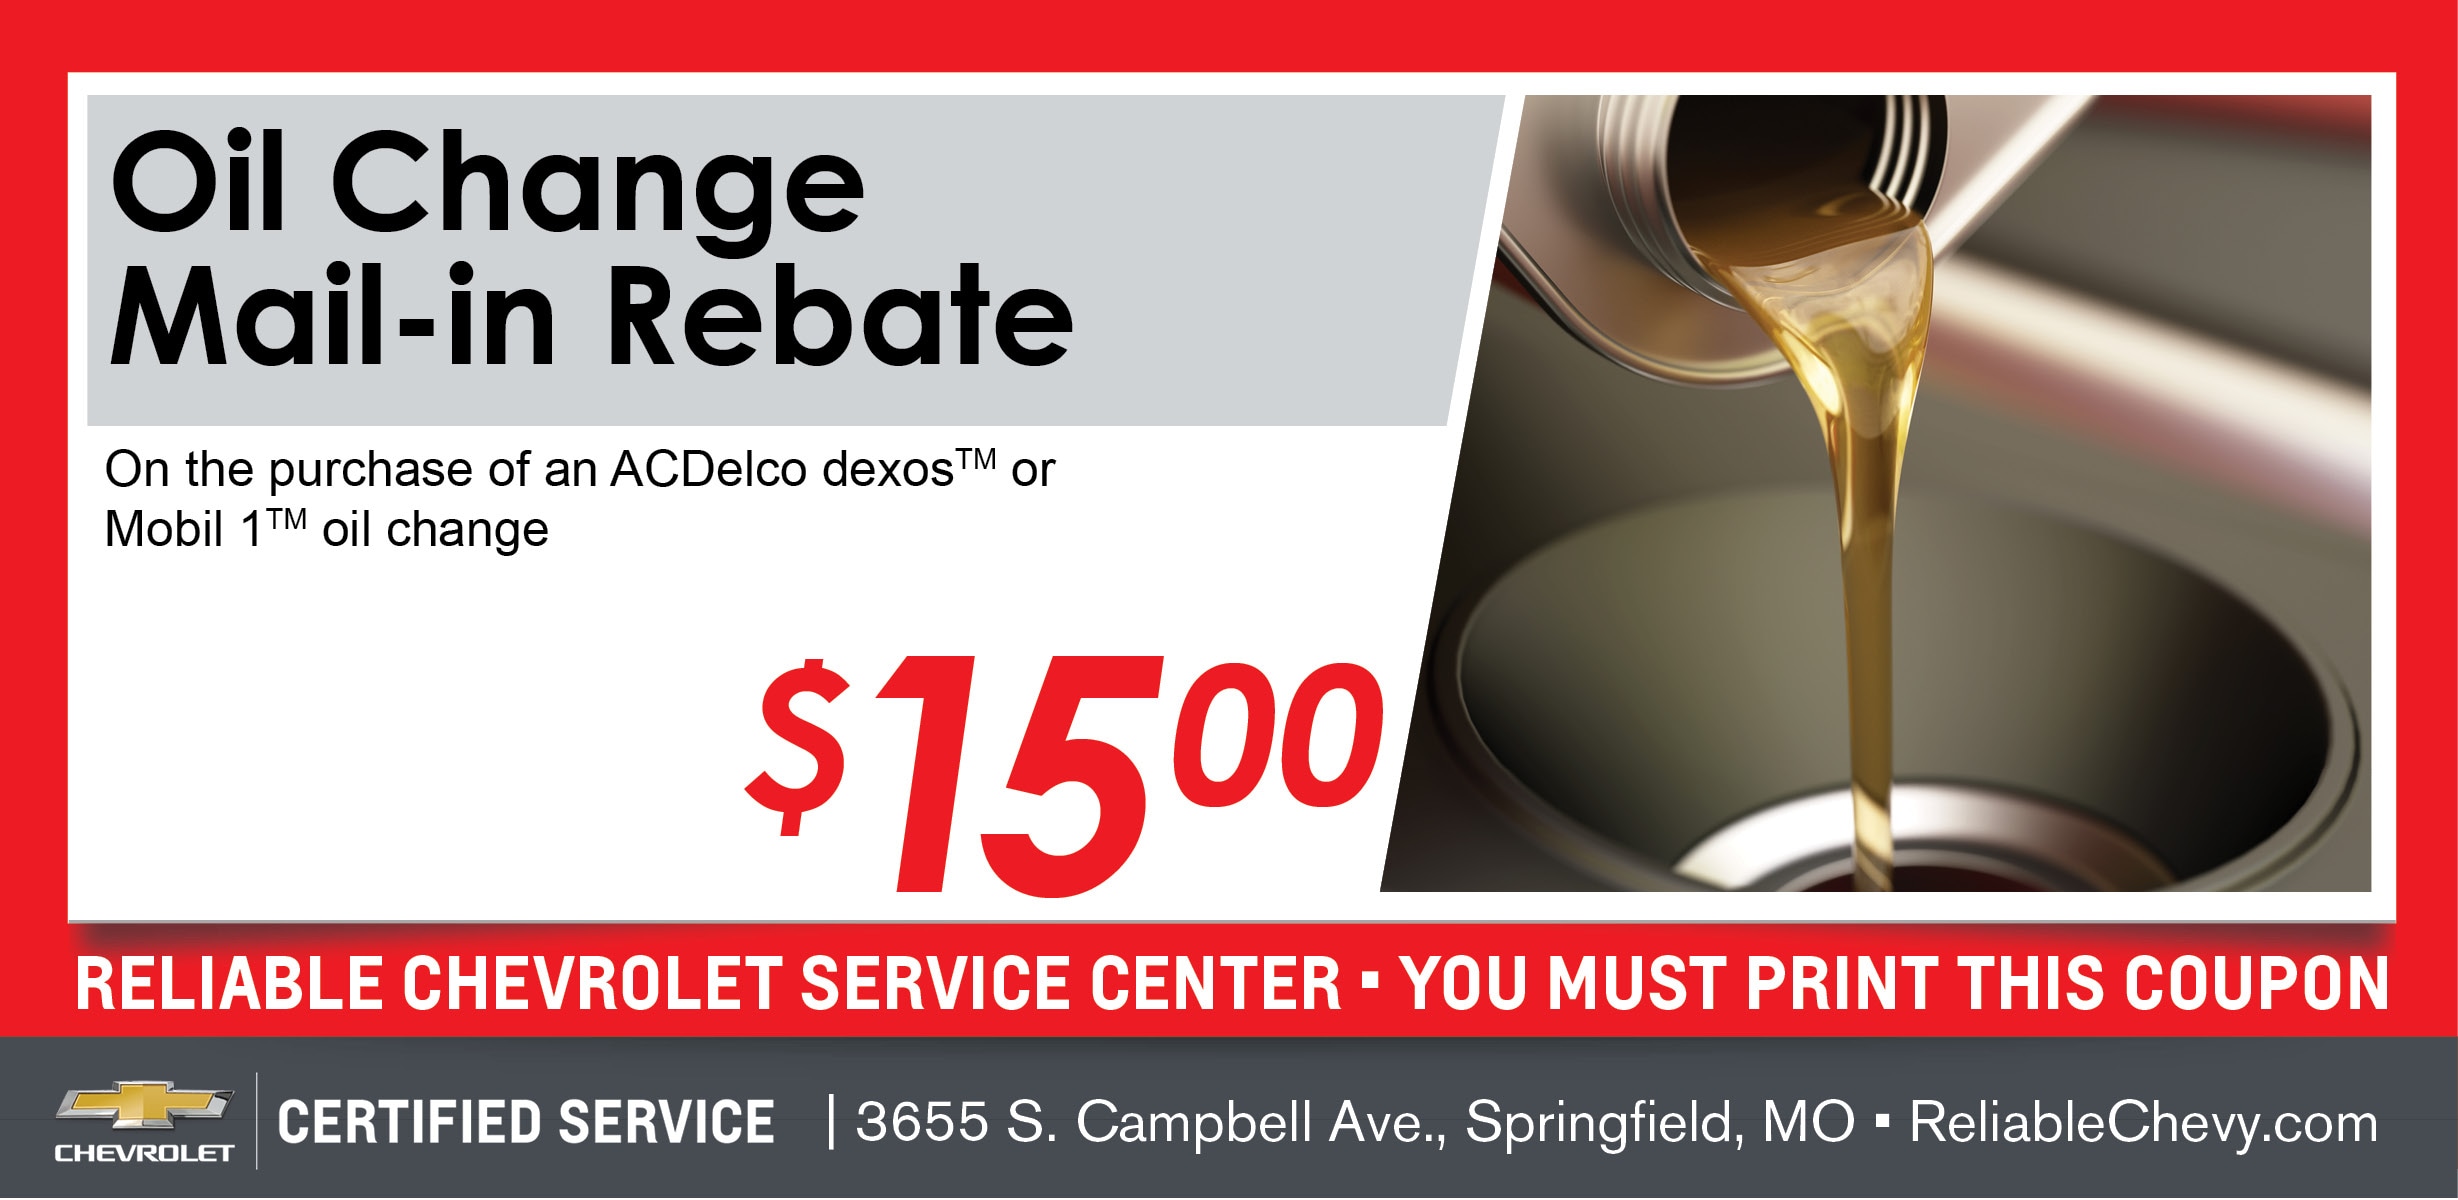 Chevy Oil Change Car Service Special Reliable Chevrolet Dealership